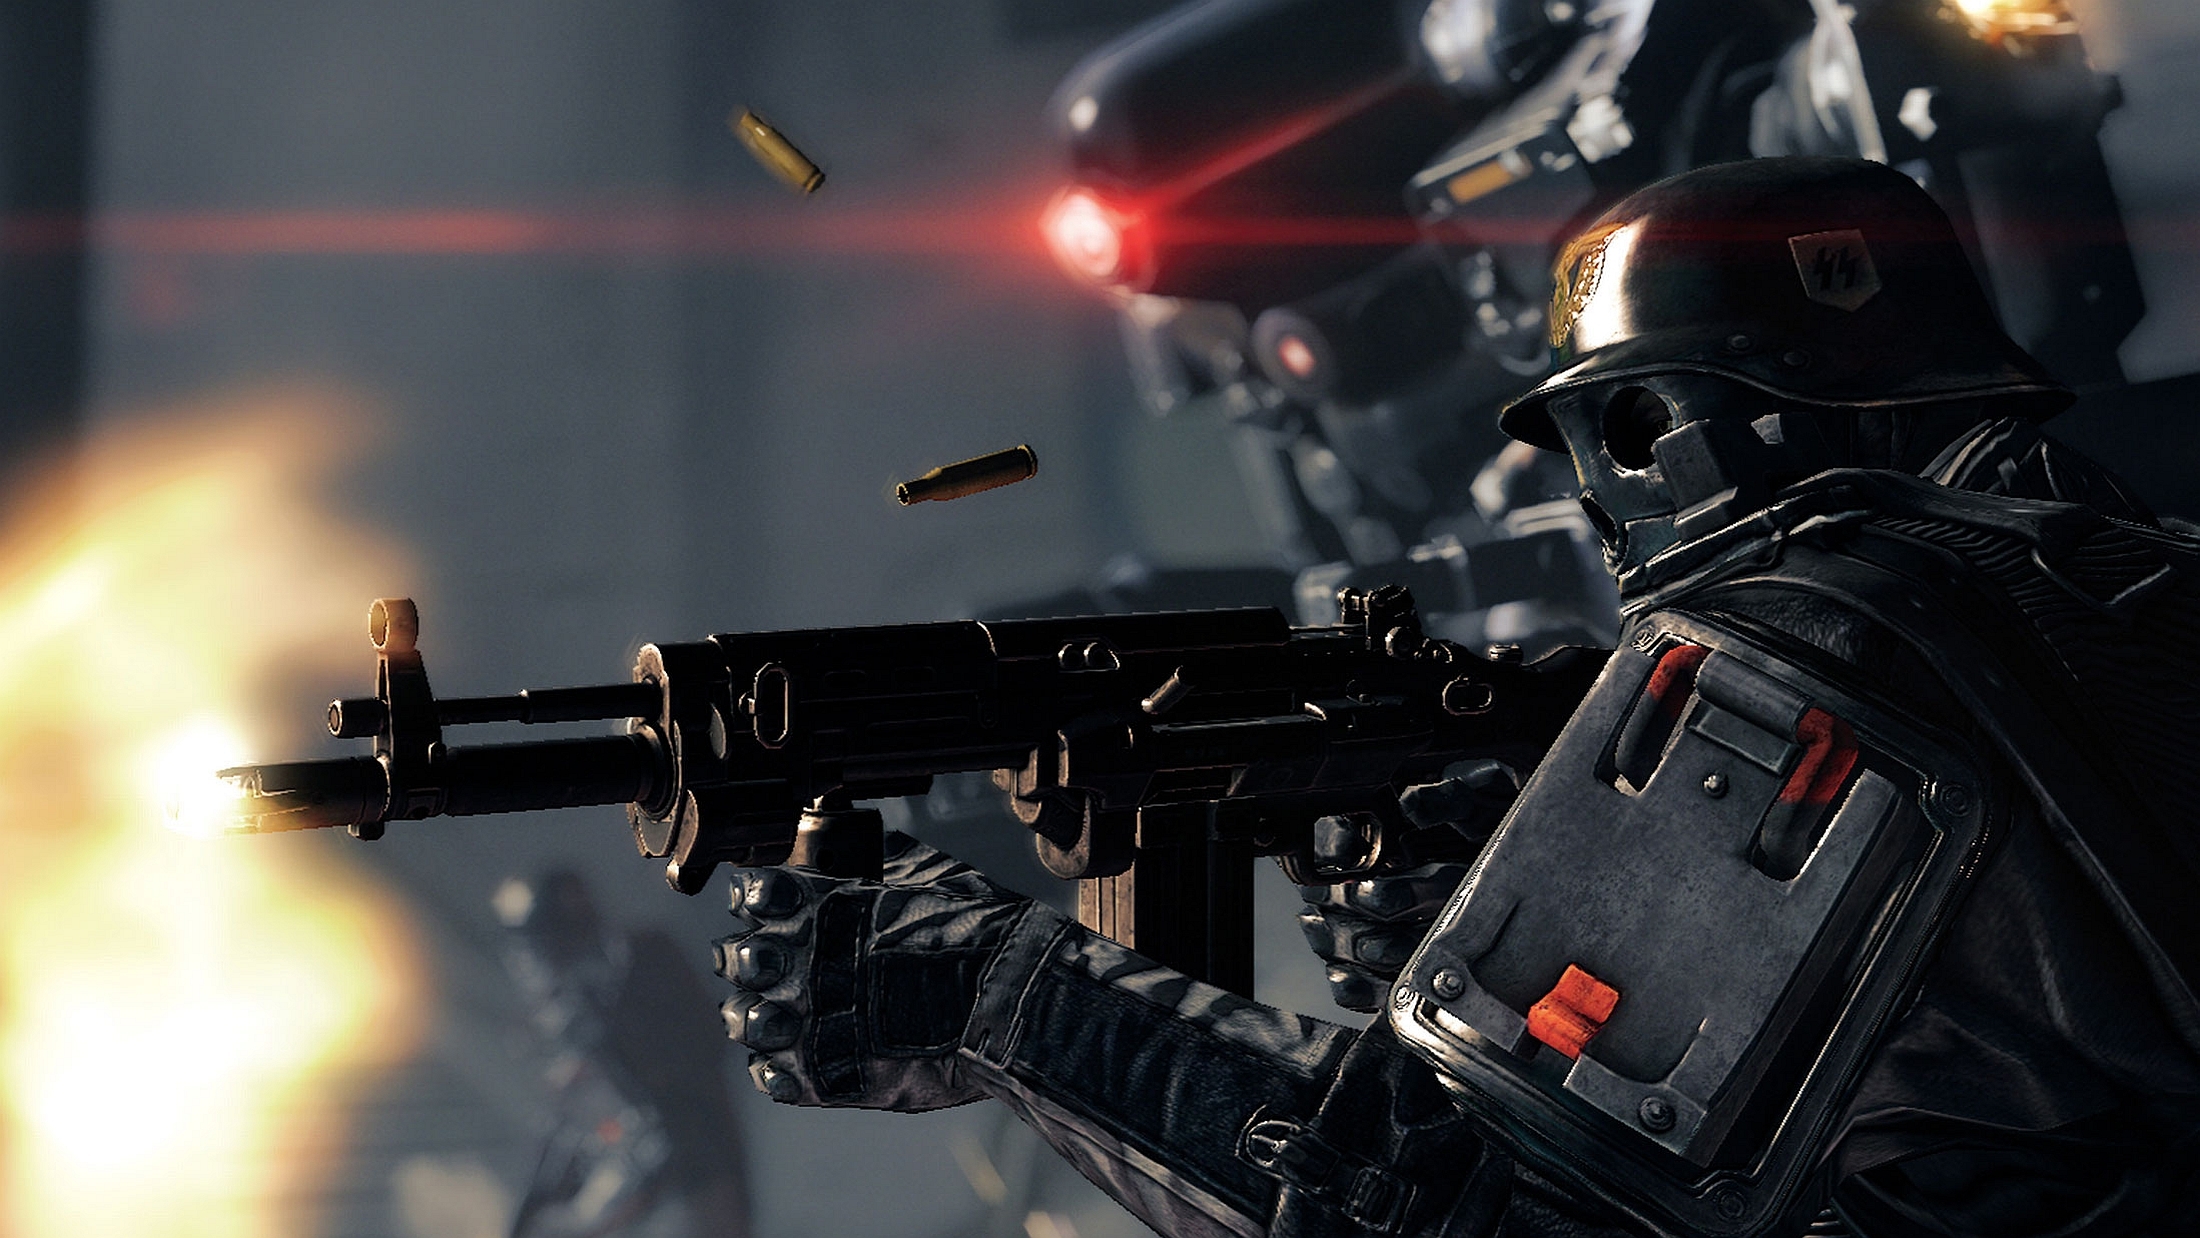 Video Game Wolfenstein II: The New Colossus HD Wallpaper | Background Image